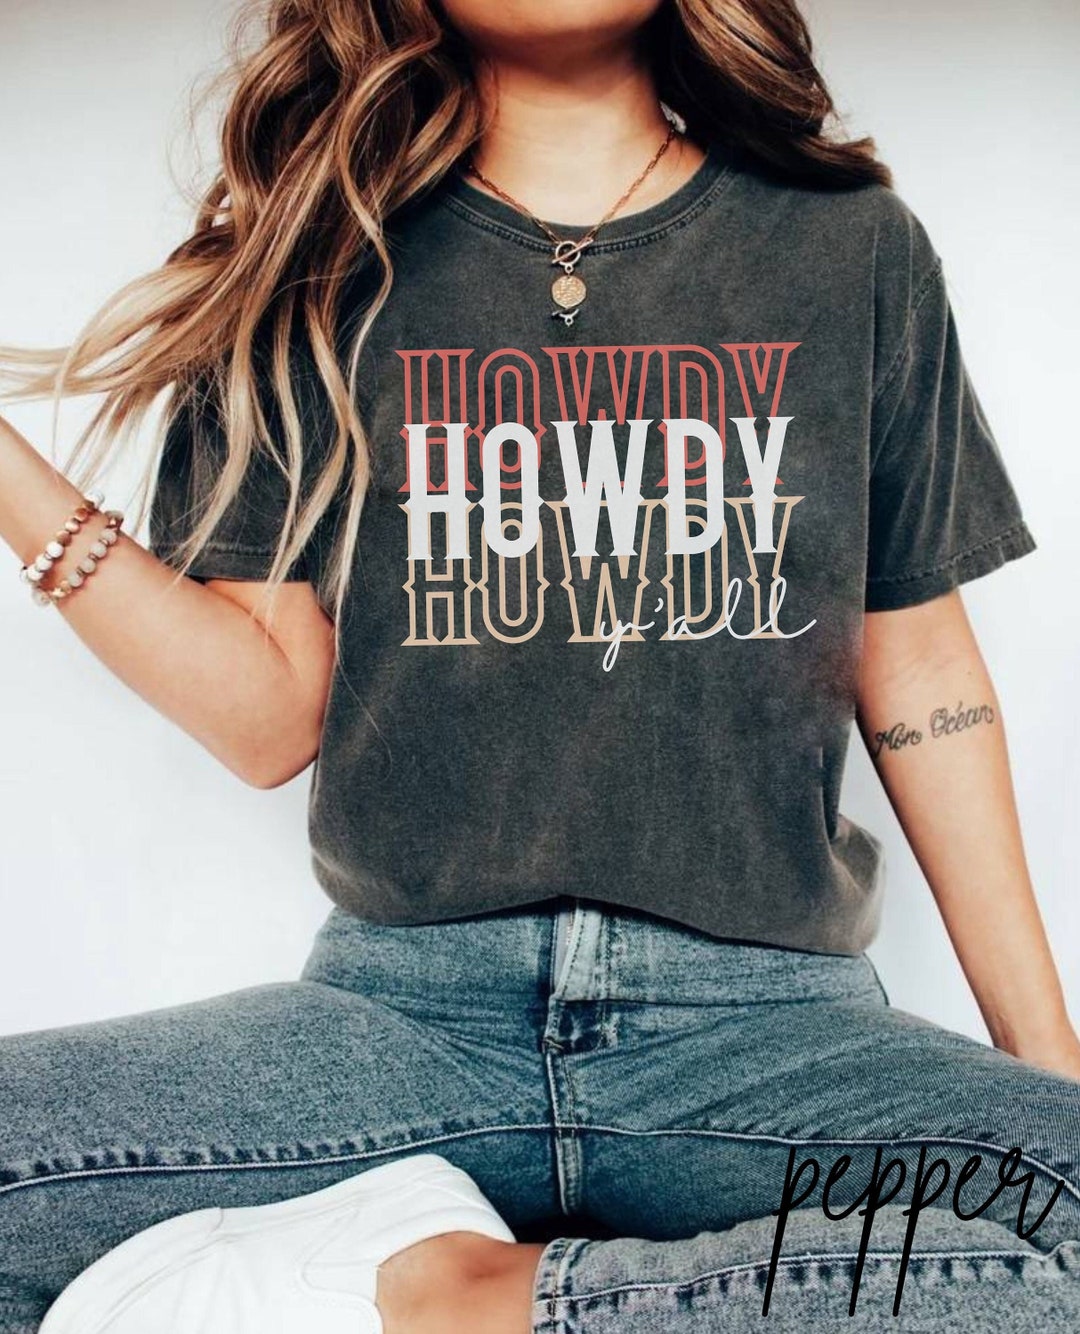 Comfort Colors Cowboy Shirt Western Graphic Tee Howdy Howdy - Etsy